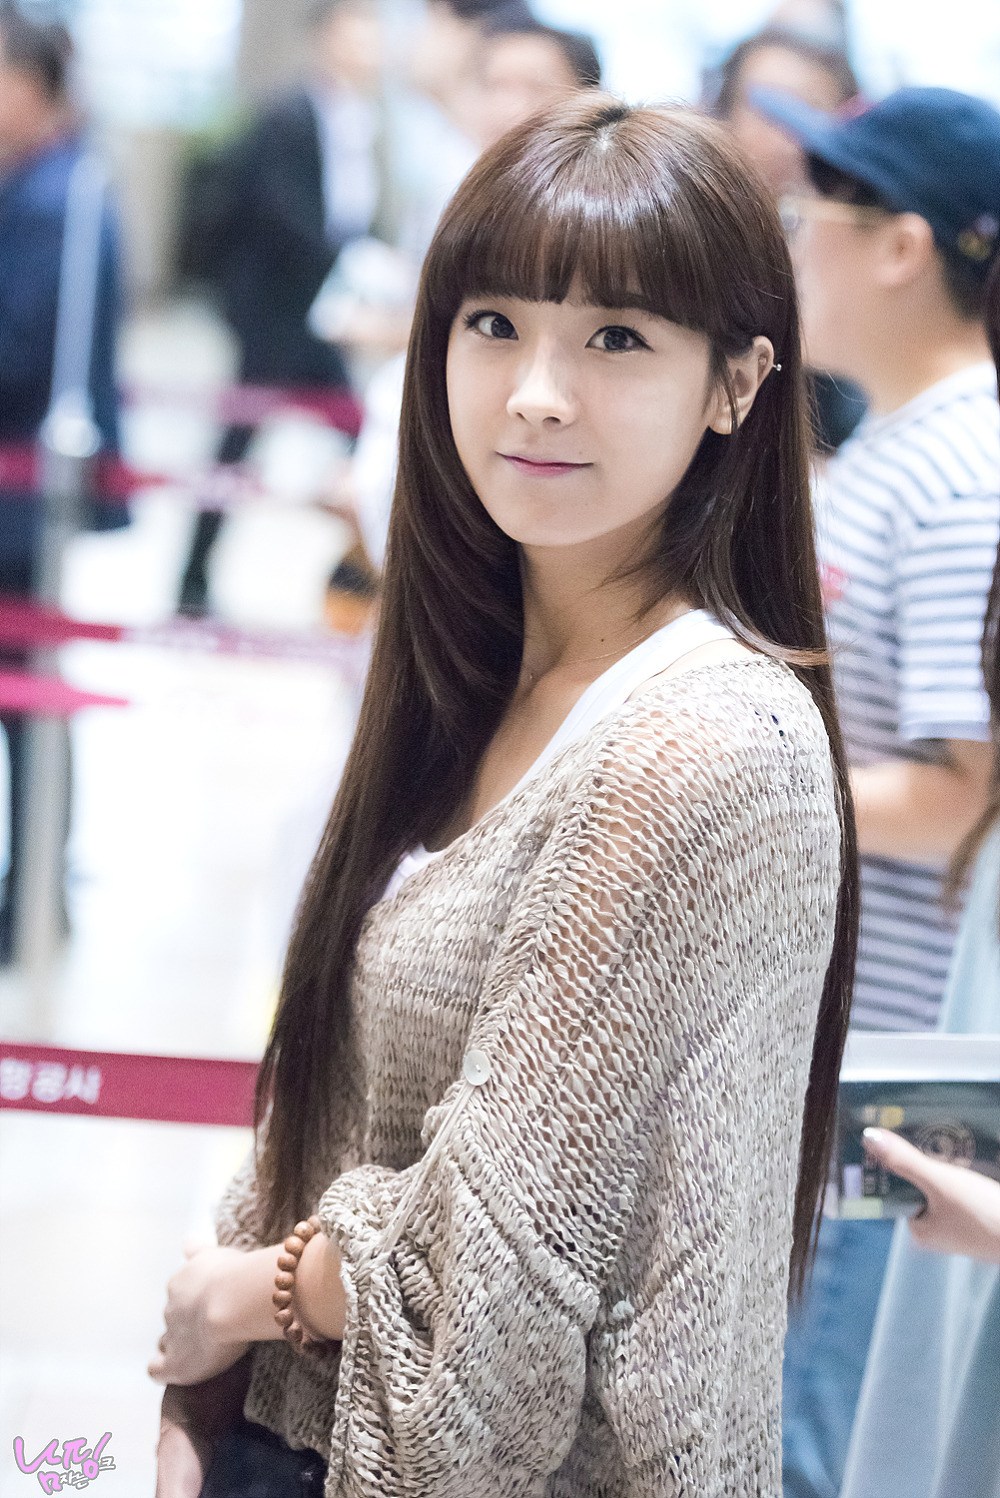 BREAKING] Crayon Pop Soyul is pregnant and having a baby ...